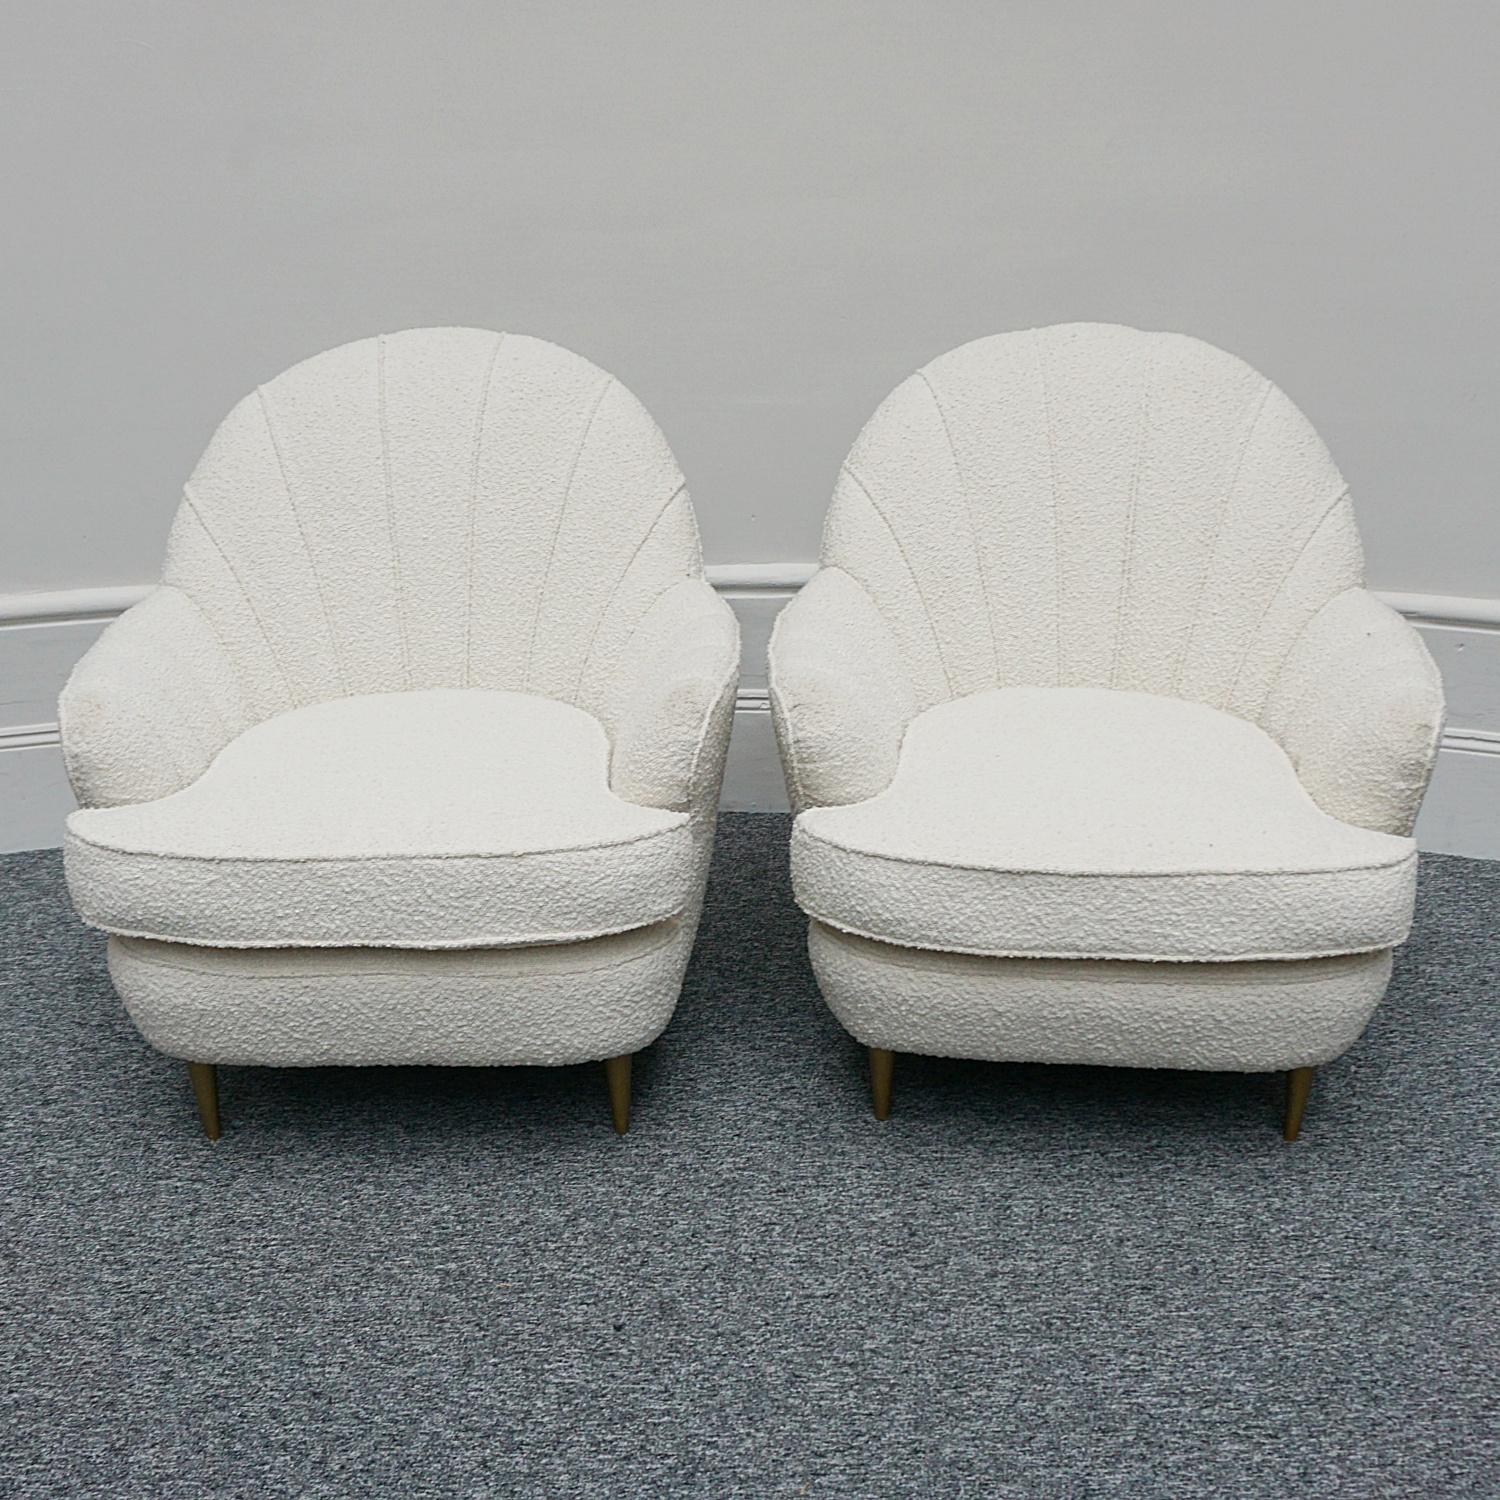 A pair of Mid-Century lounge chairs with a shell shaped back and gold painted legs. Re-upholstered in white Bouclé.

Dimensions: H 88cm W 85cm D 59cm Seat H 47cm

Origin: Italian

Date: Circa 1950

Item Number: 0102231

All of our